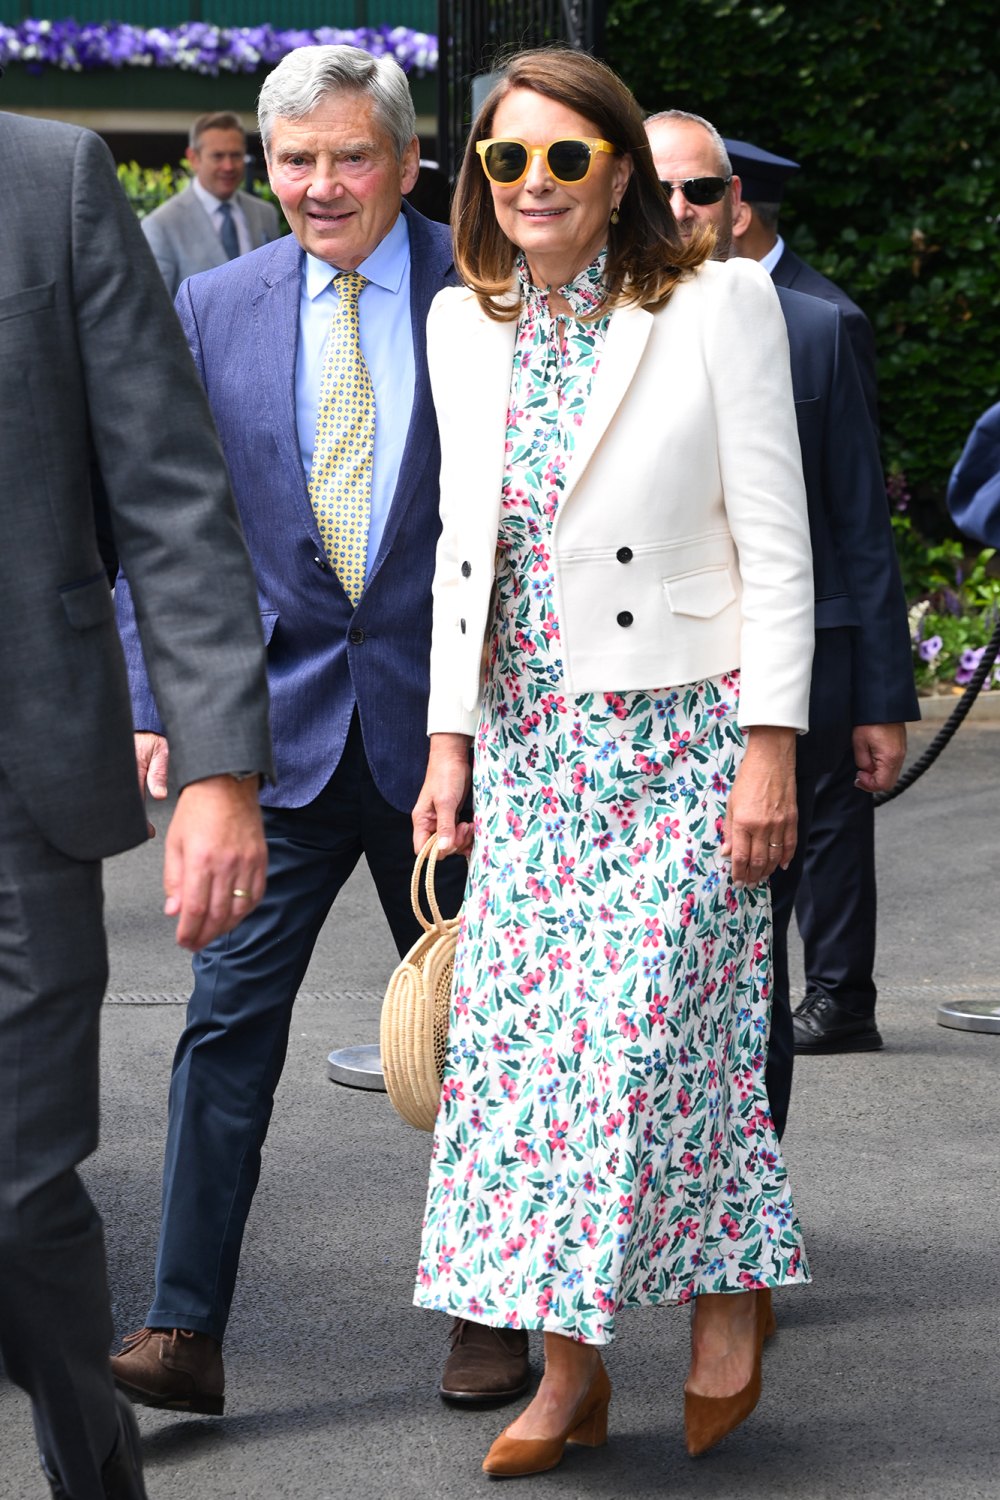 Kate Middleton's Parents Carole and Michael Make an Appearance at Wimbledon Without Her